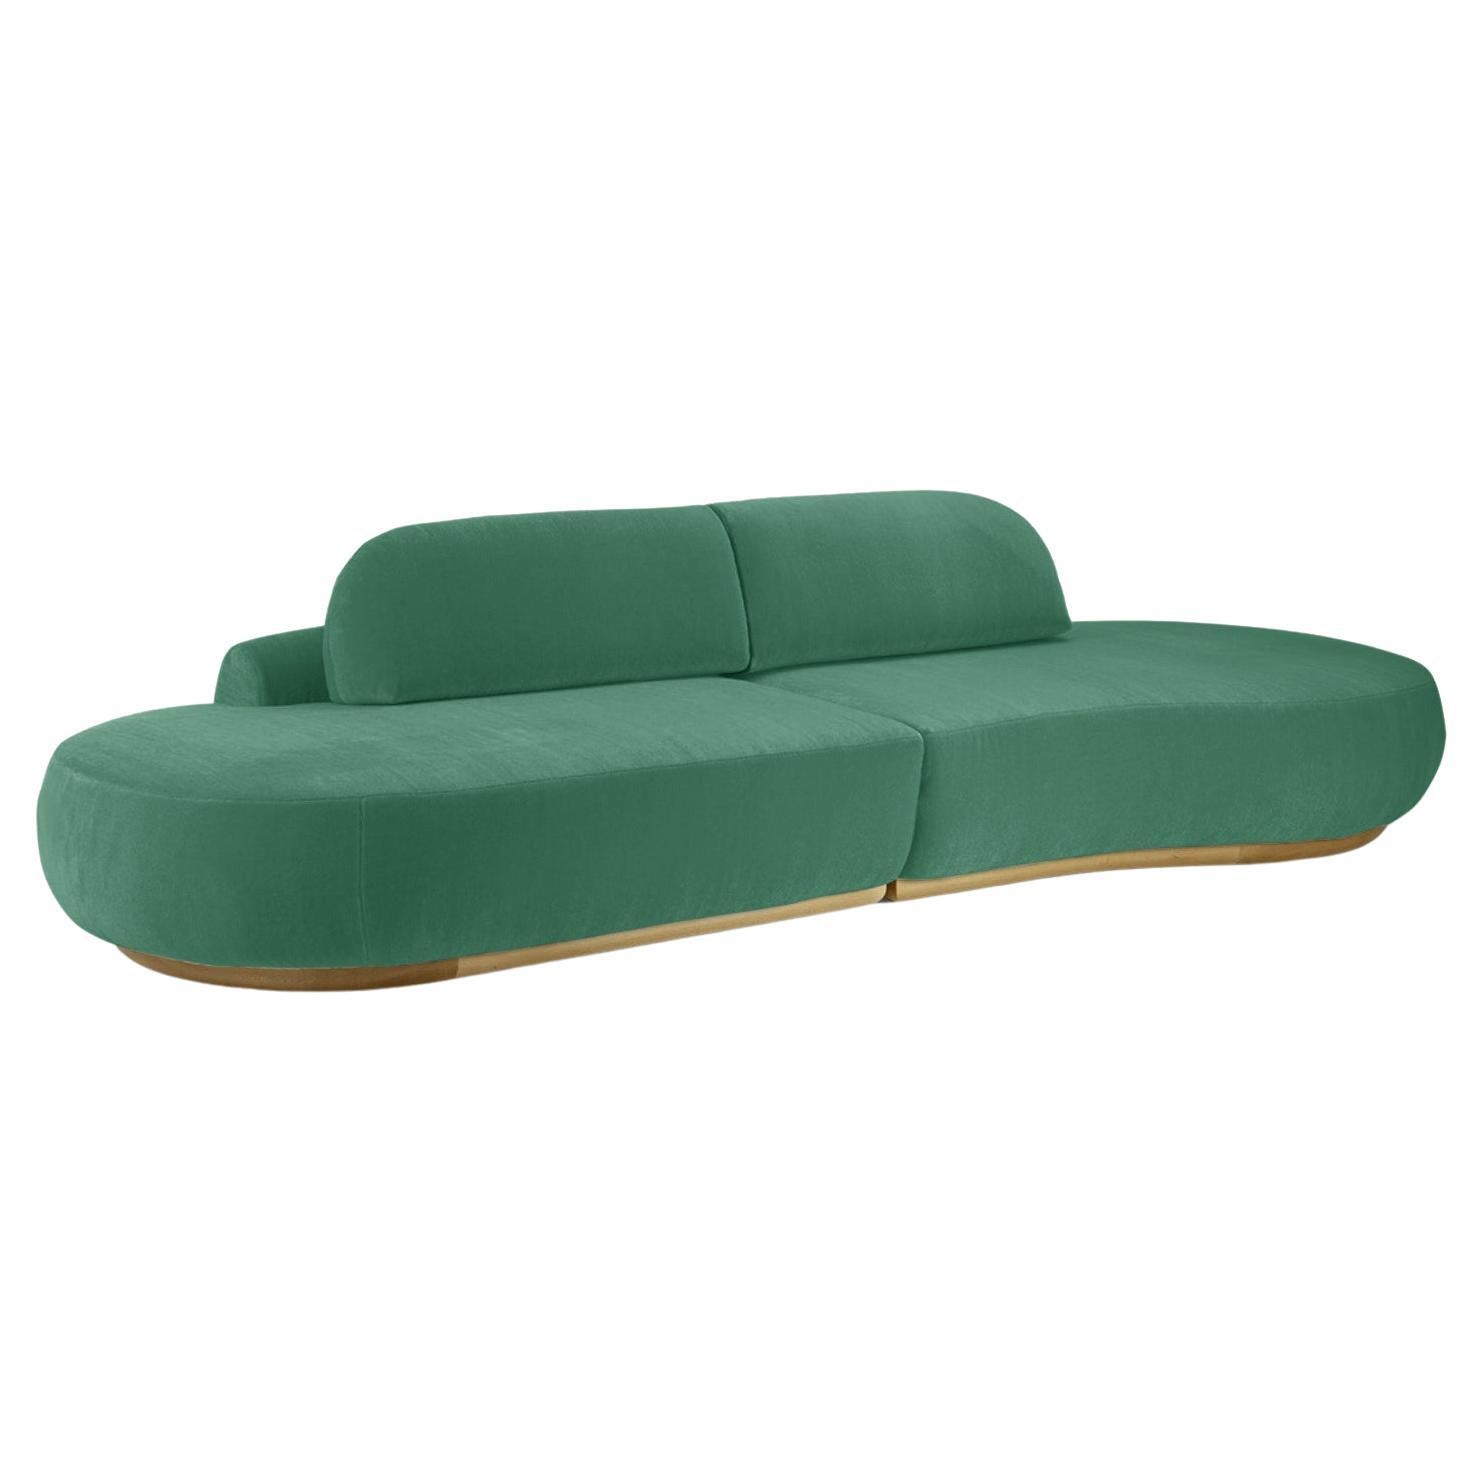 Naked Curved Sectional Sofa, 2 Piece with Natural Oak and Paris Green